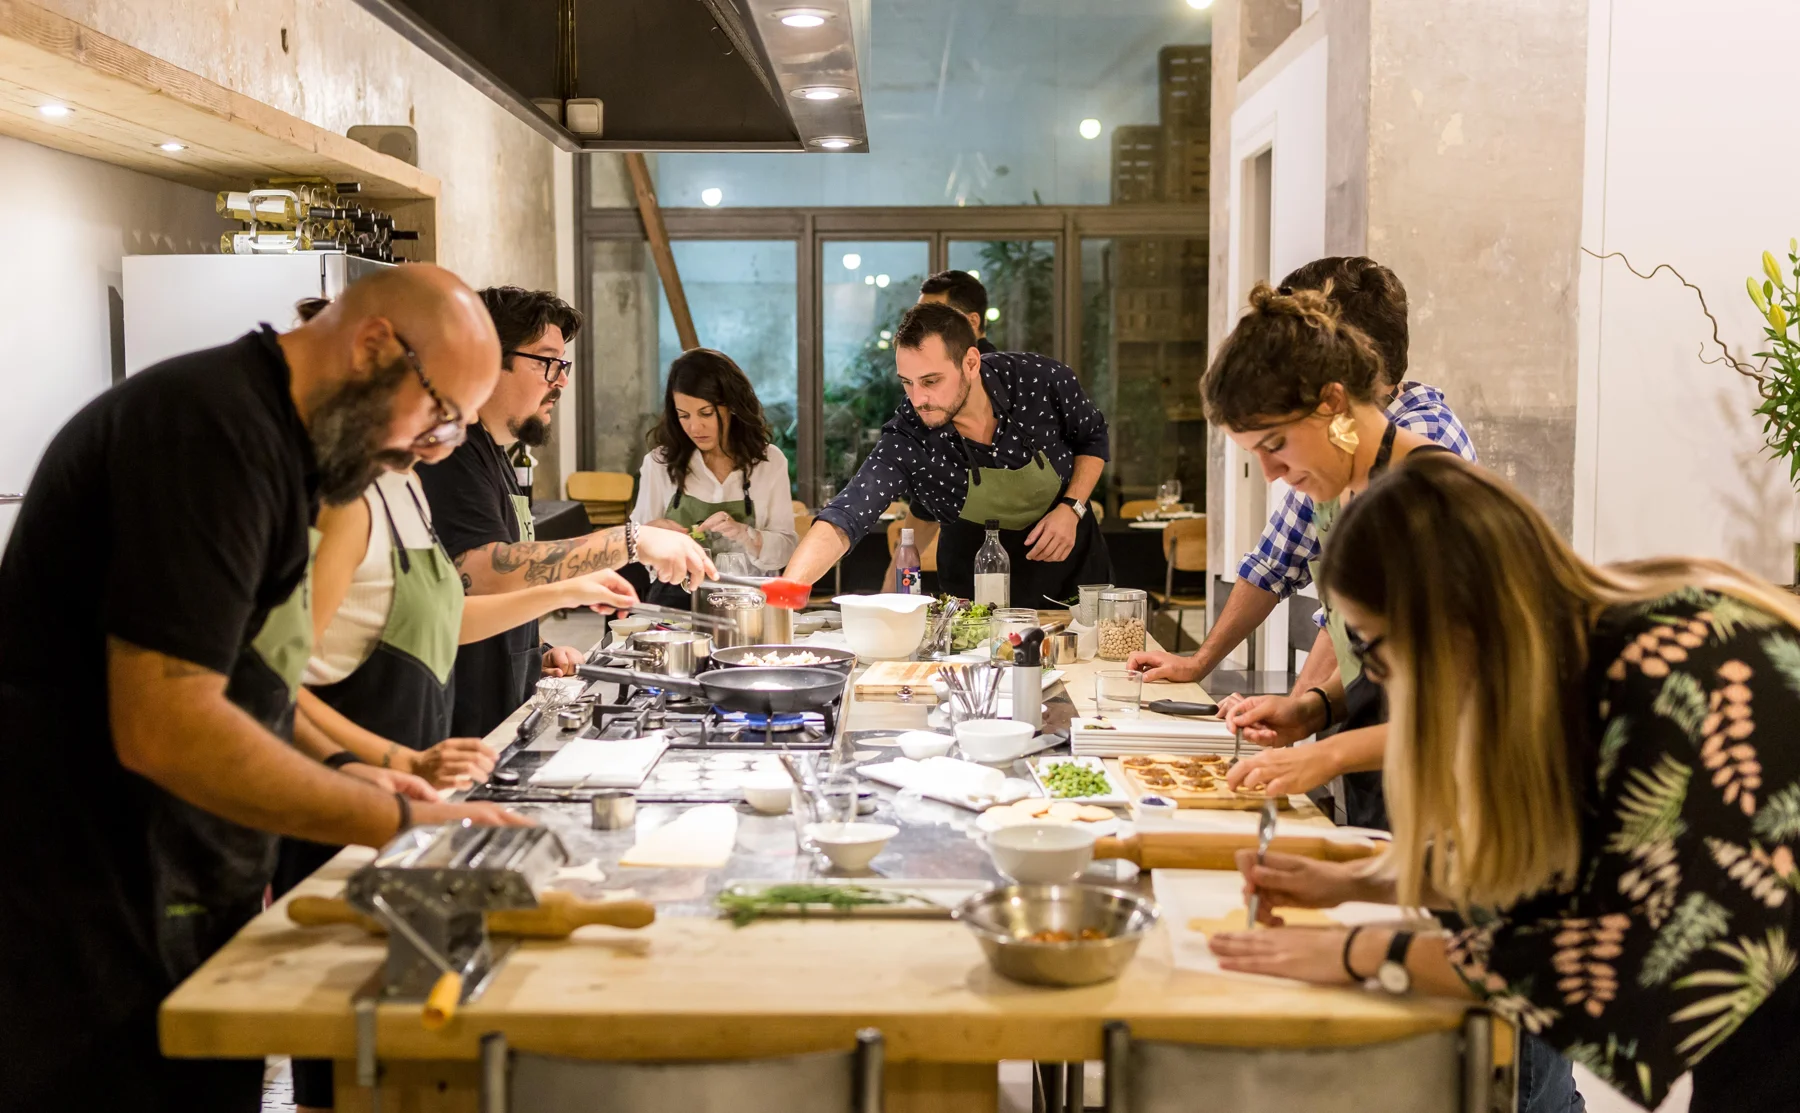 Interactive tapas cooking class and dinner in a converted factory  - 1316119